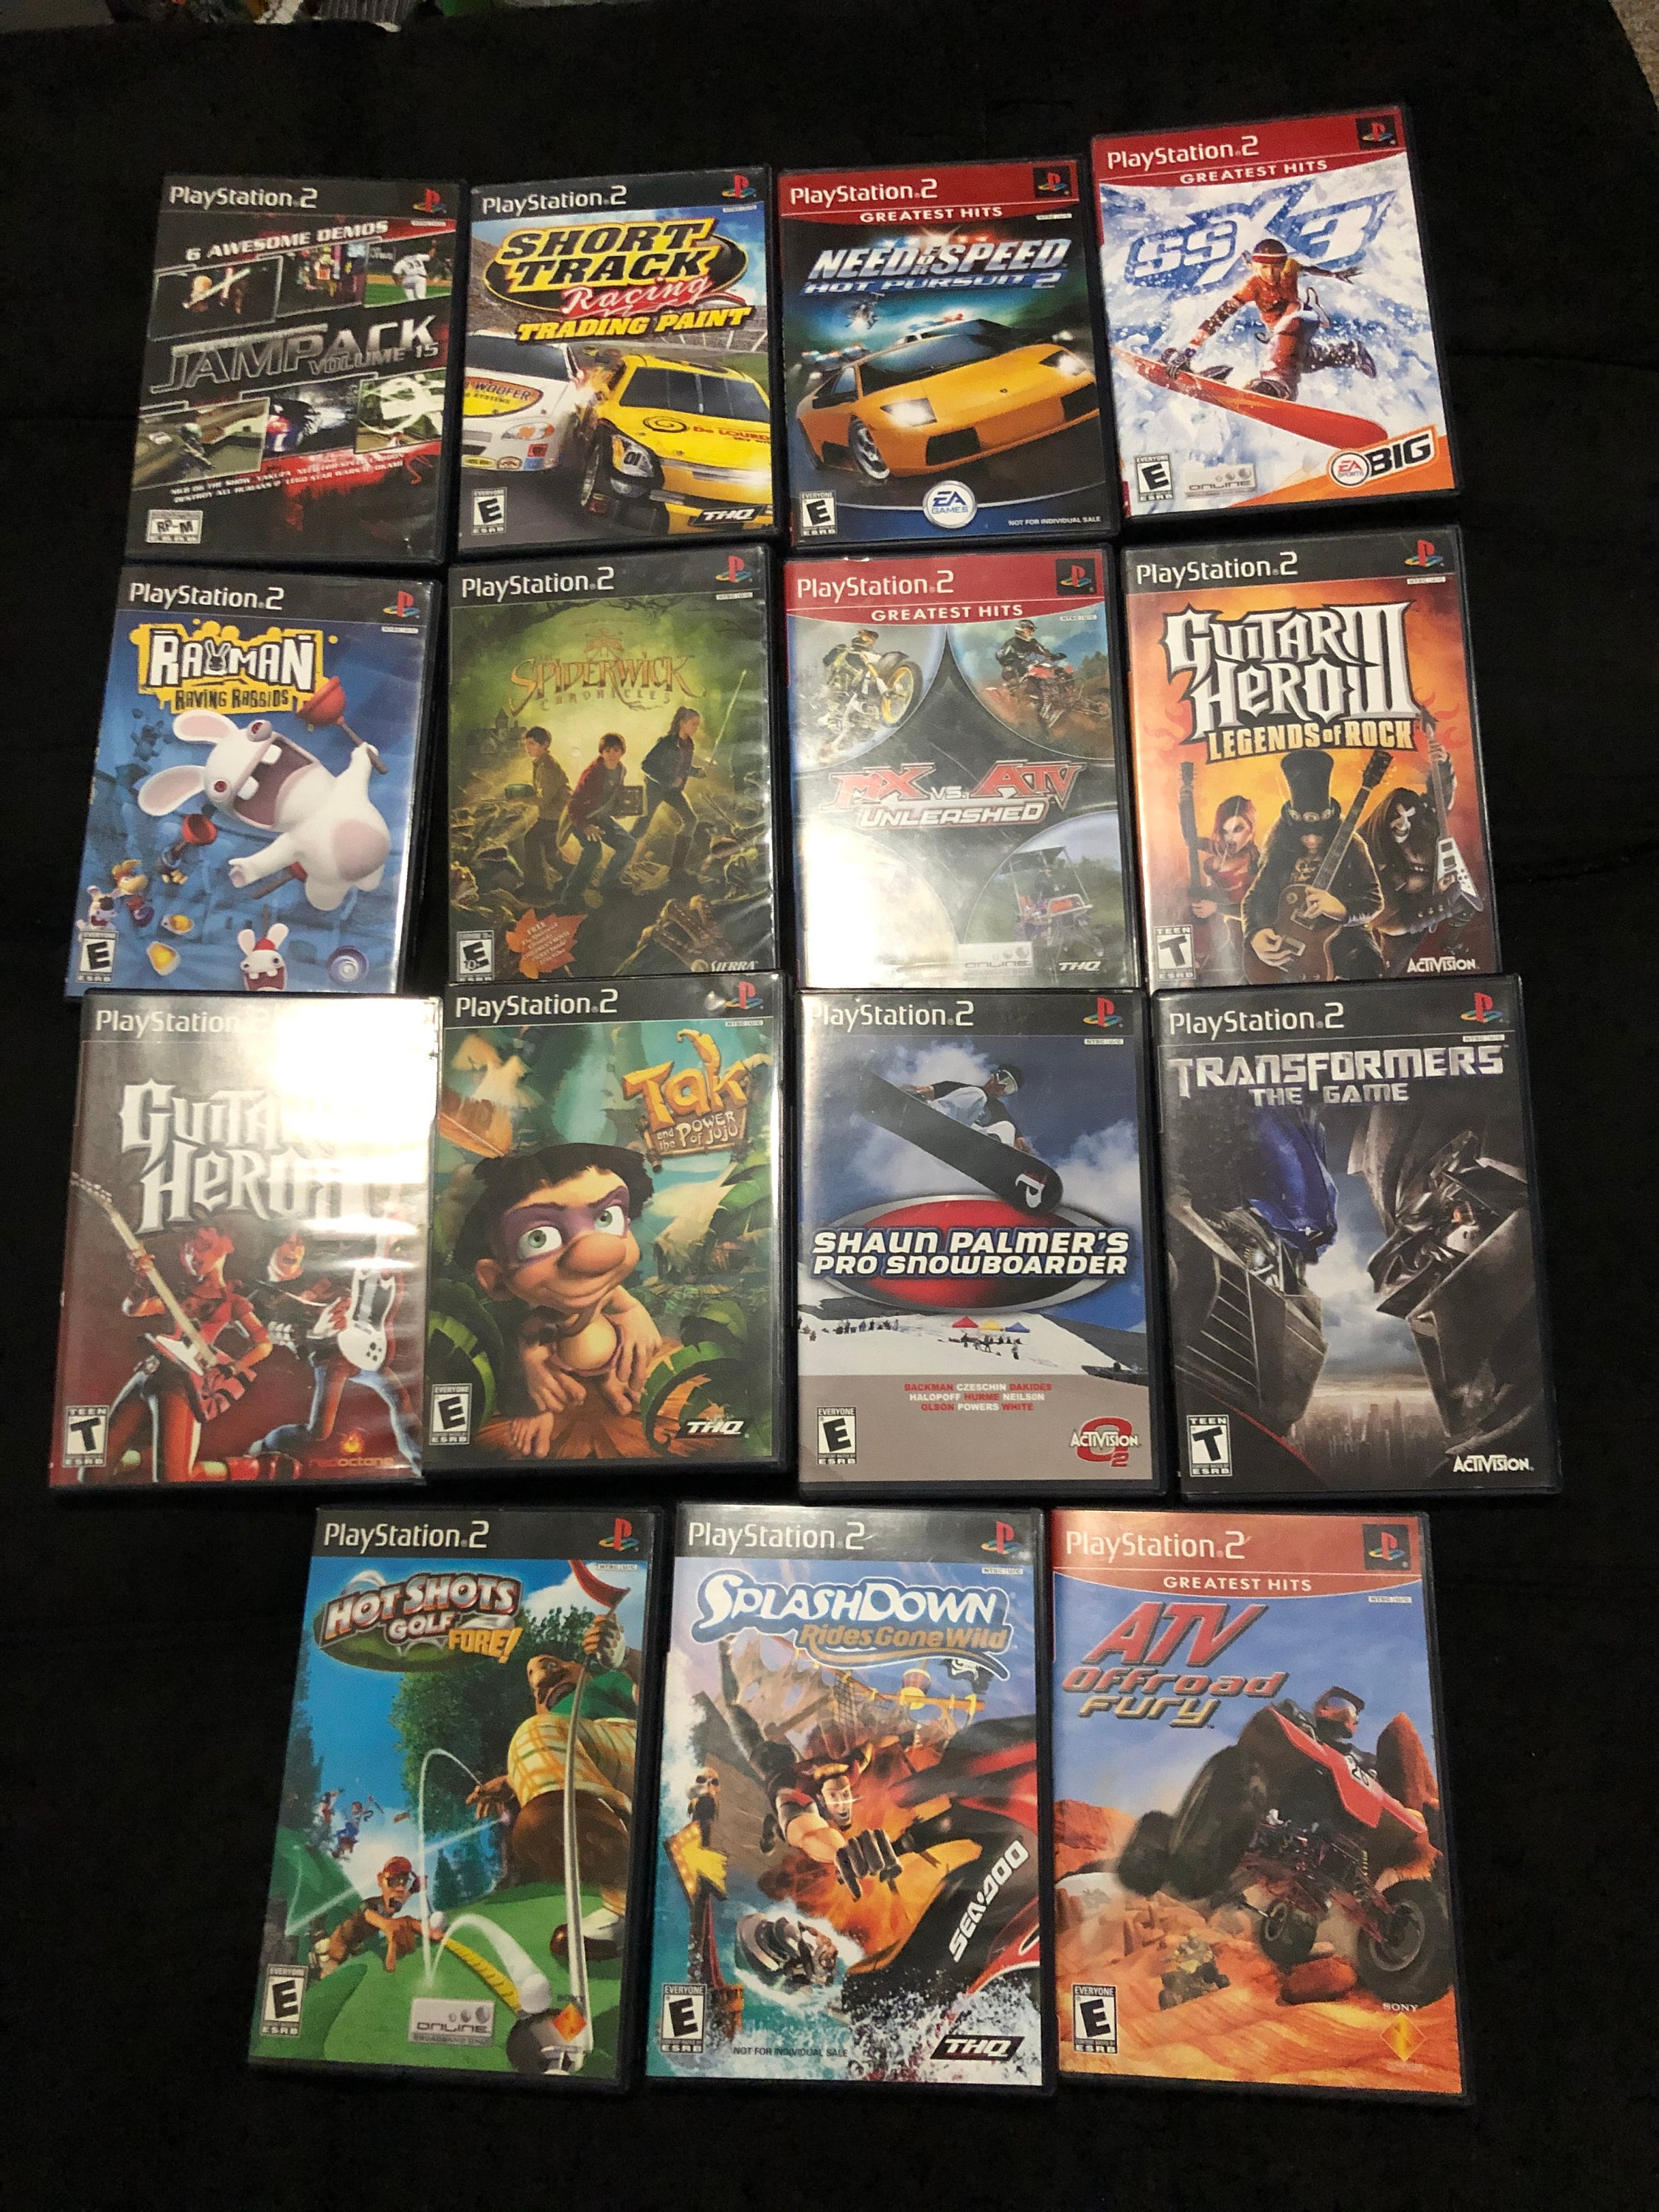 Playstation 2 PS2 Games - Games - Ideas of Games #games